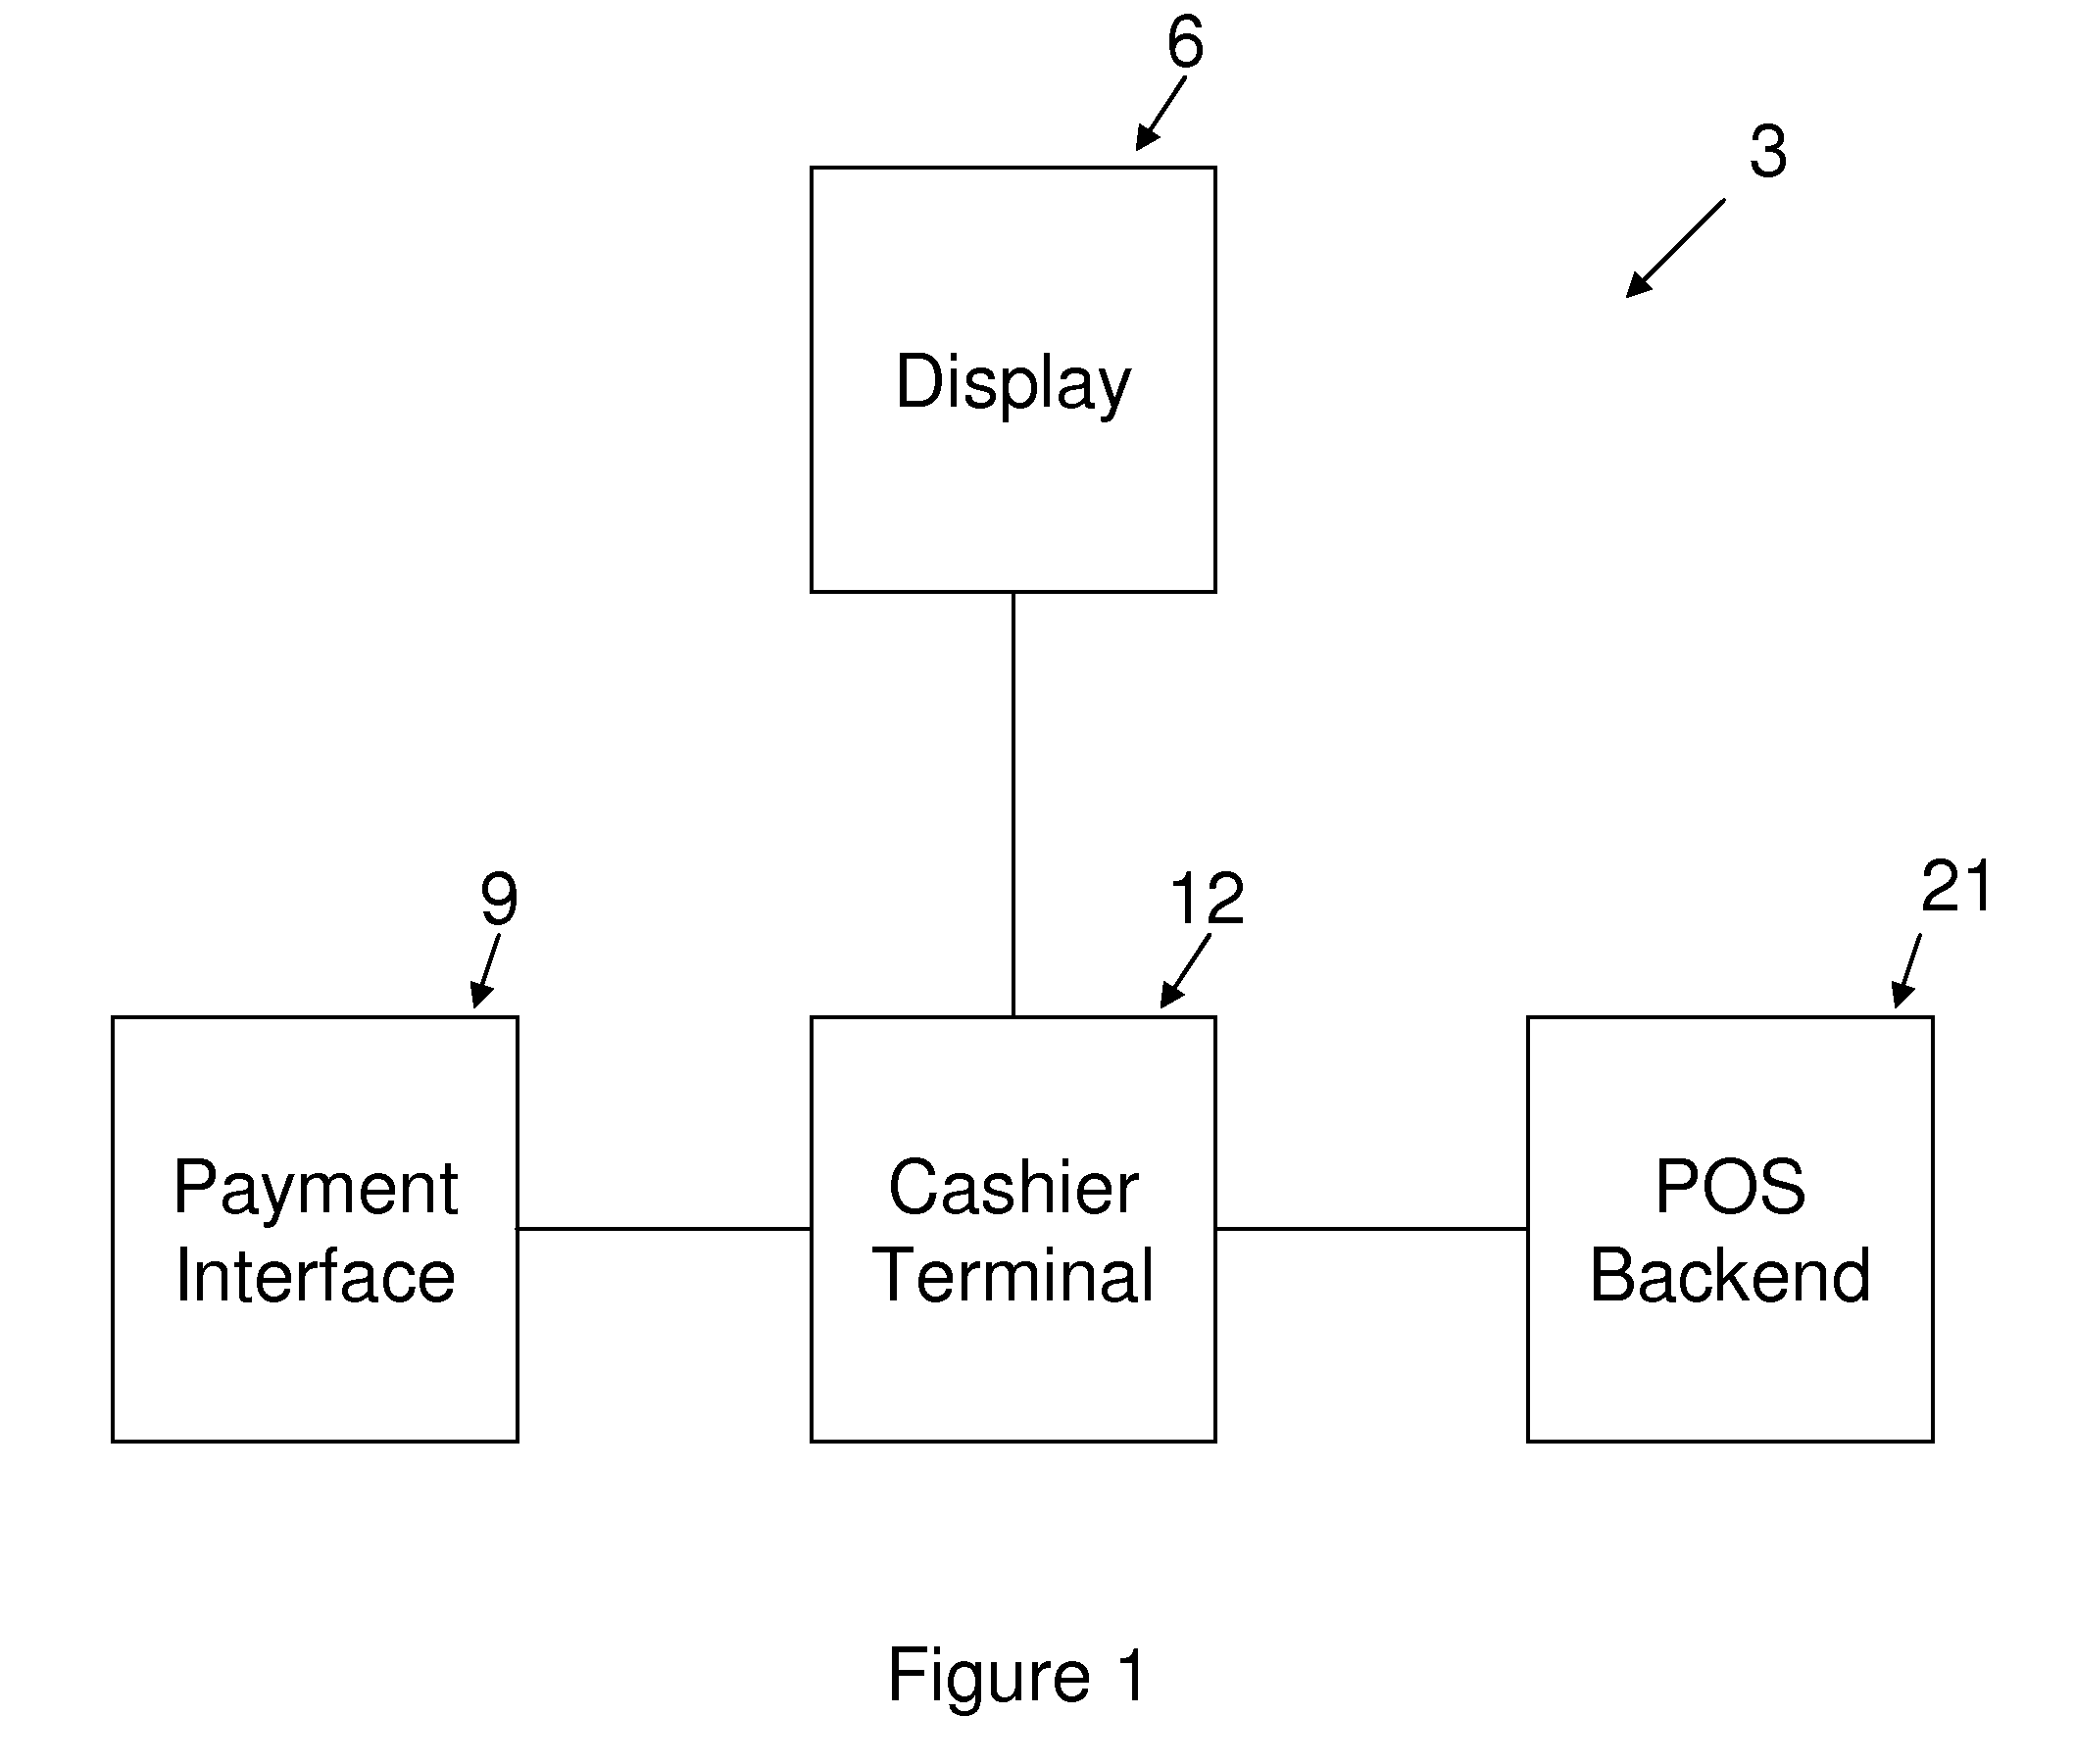 Point-Of-Sale System Implementing Criteria-Based Transaction Totals